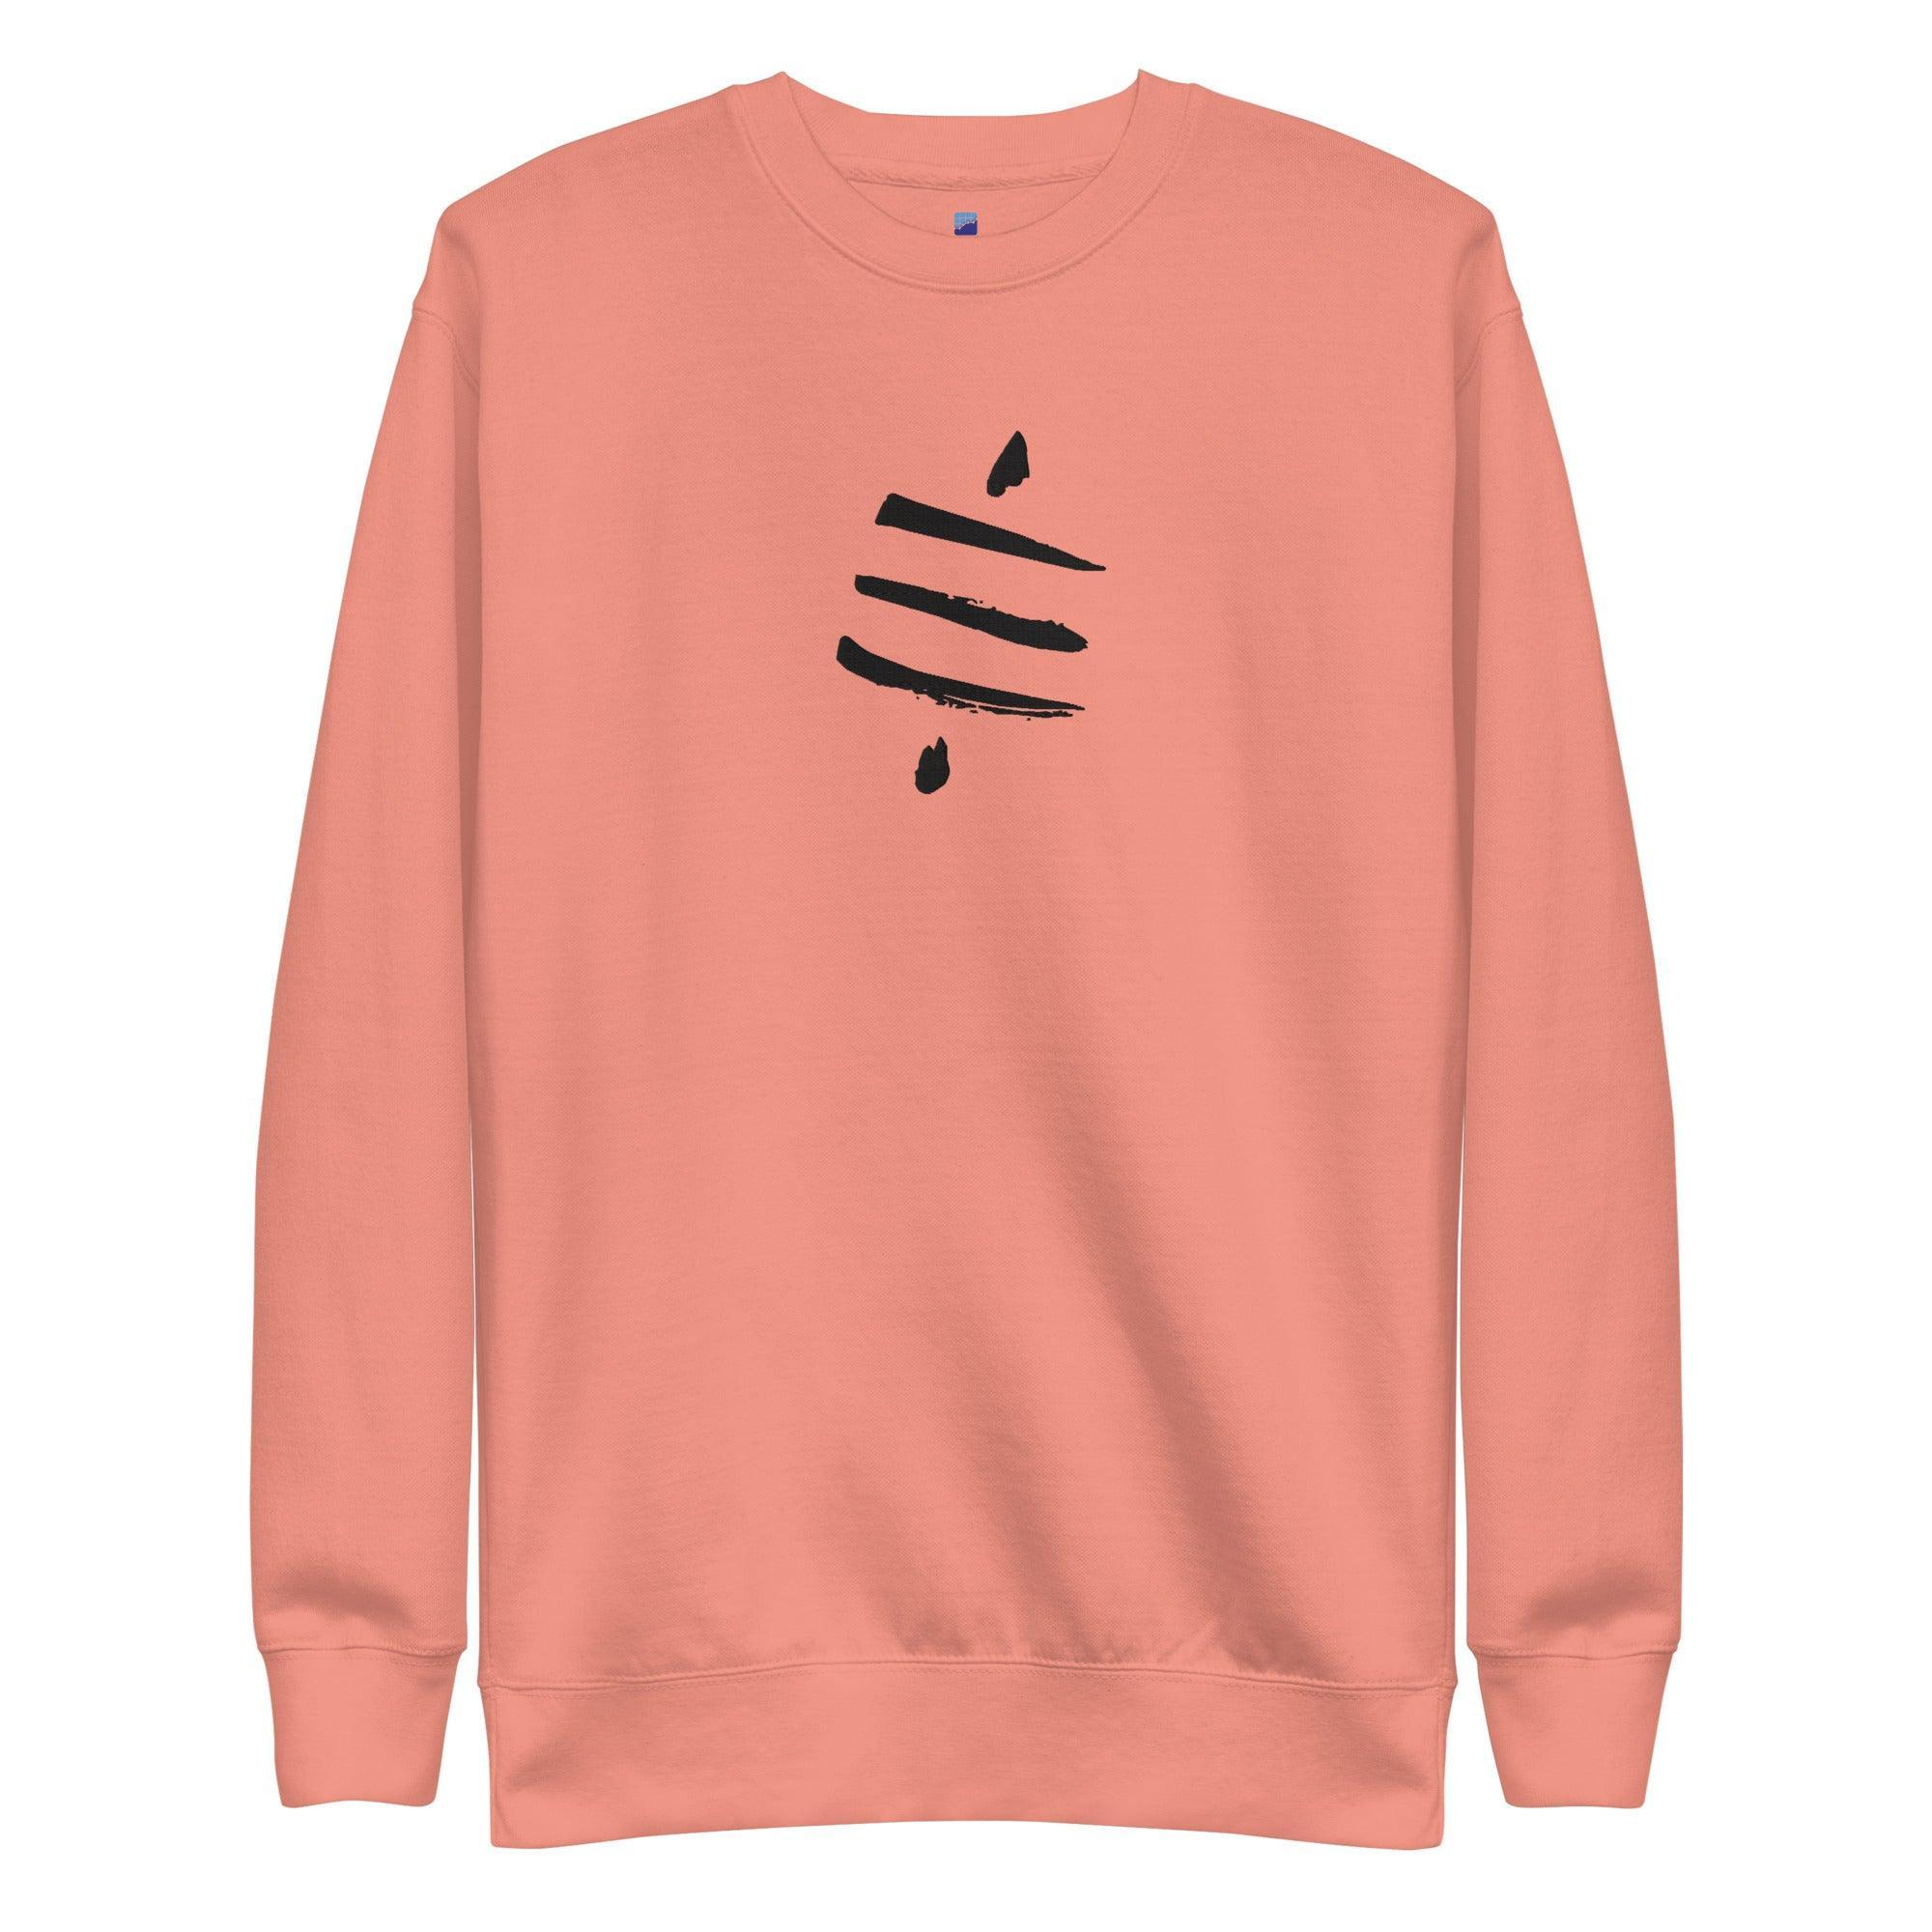 Euro Currency Character Sweatshirt - InvestmenTees